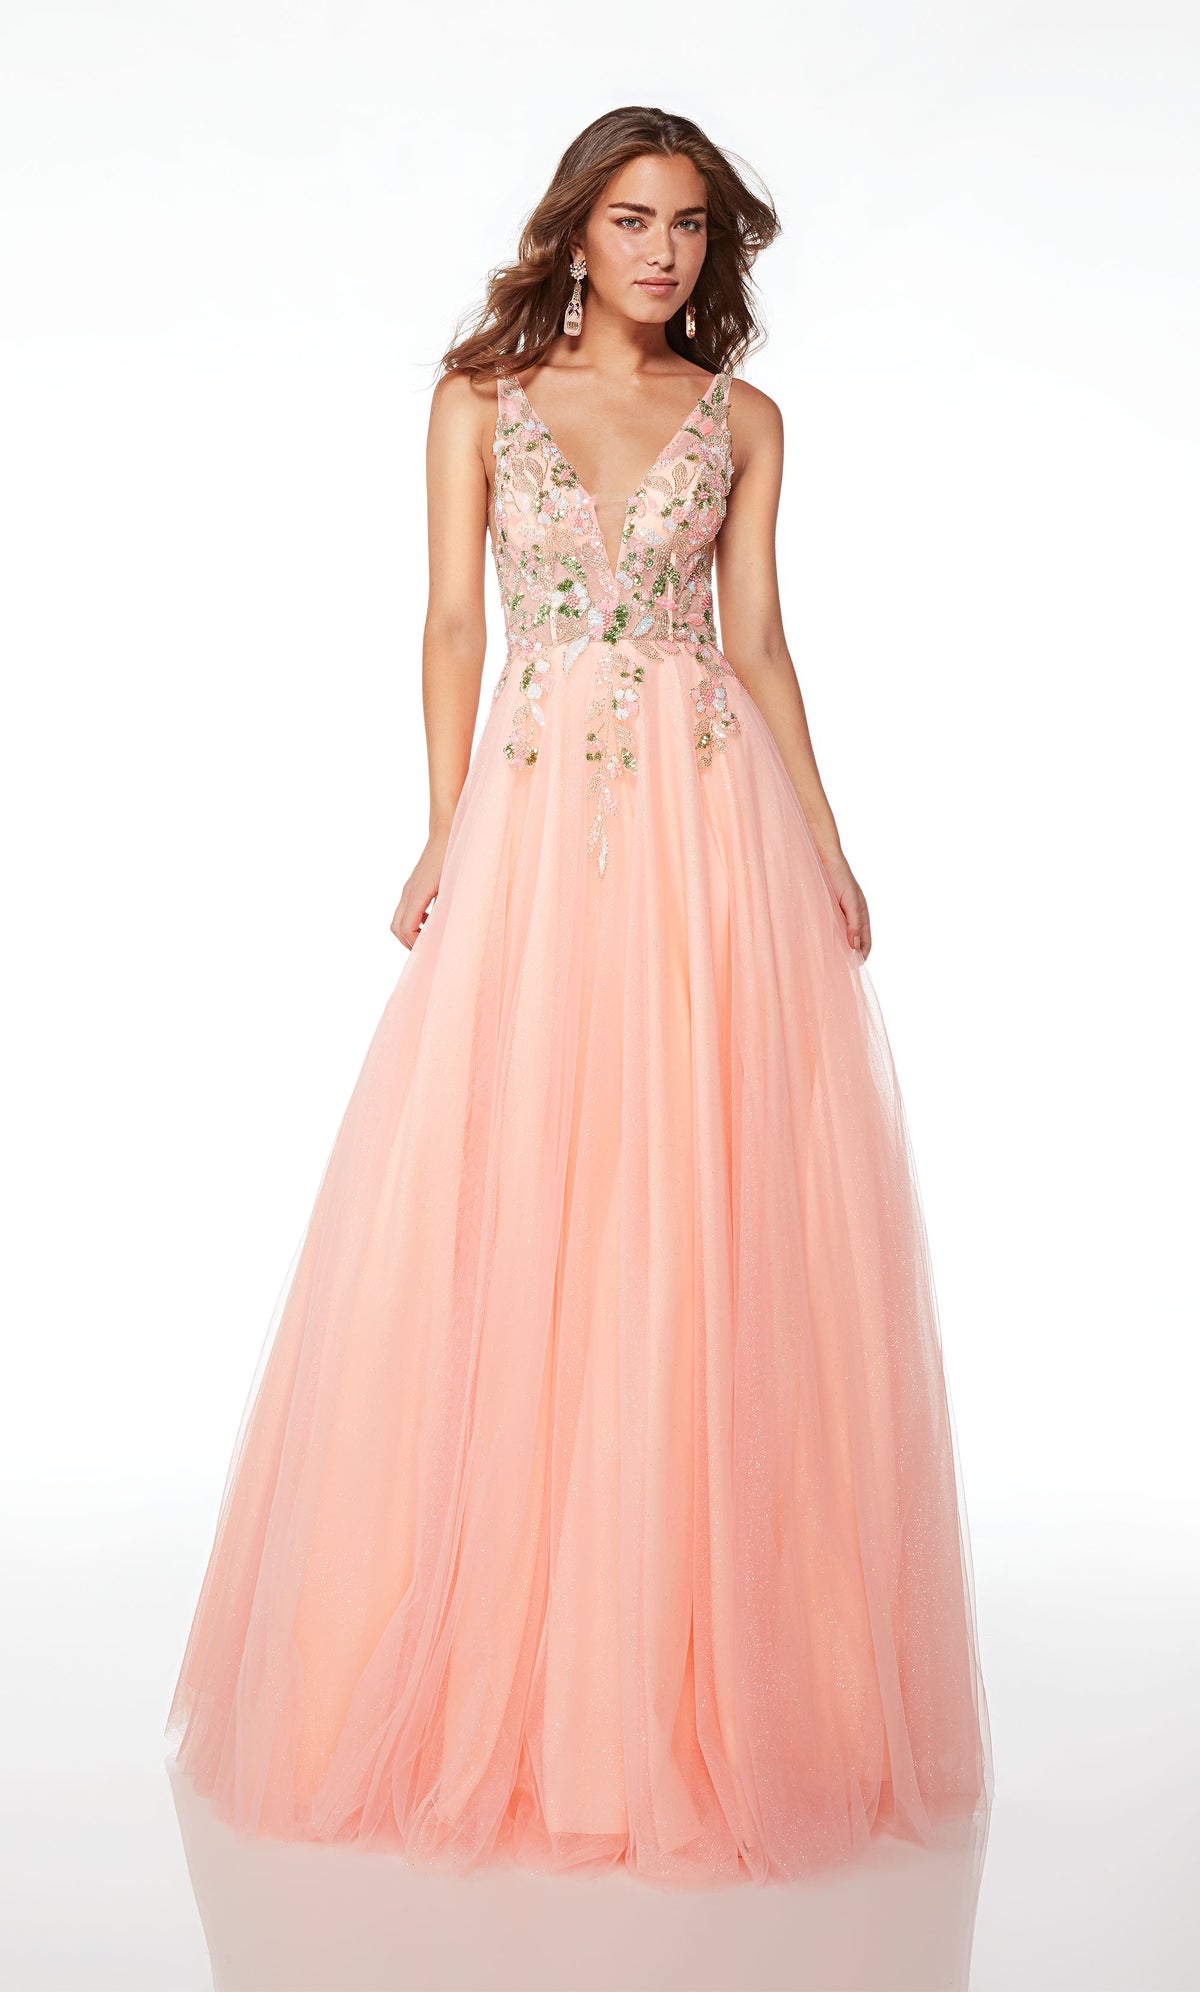 Coral pink prom dress featuring an deep V neckline, an deep V back, hand-beaded bodice, and A-line glitter tulle skirt for an stunning and stylish ensemble.